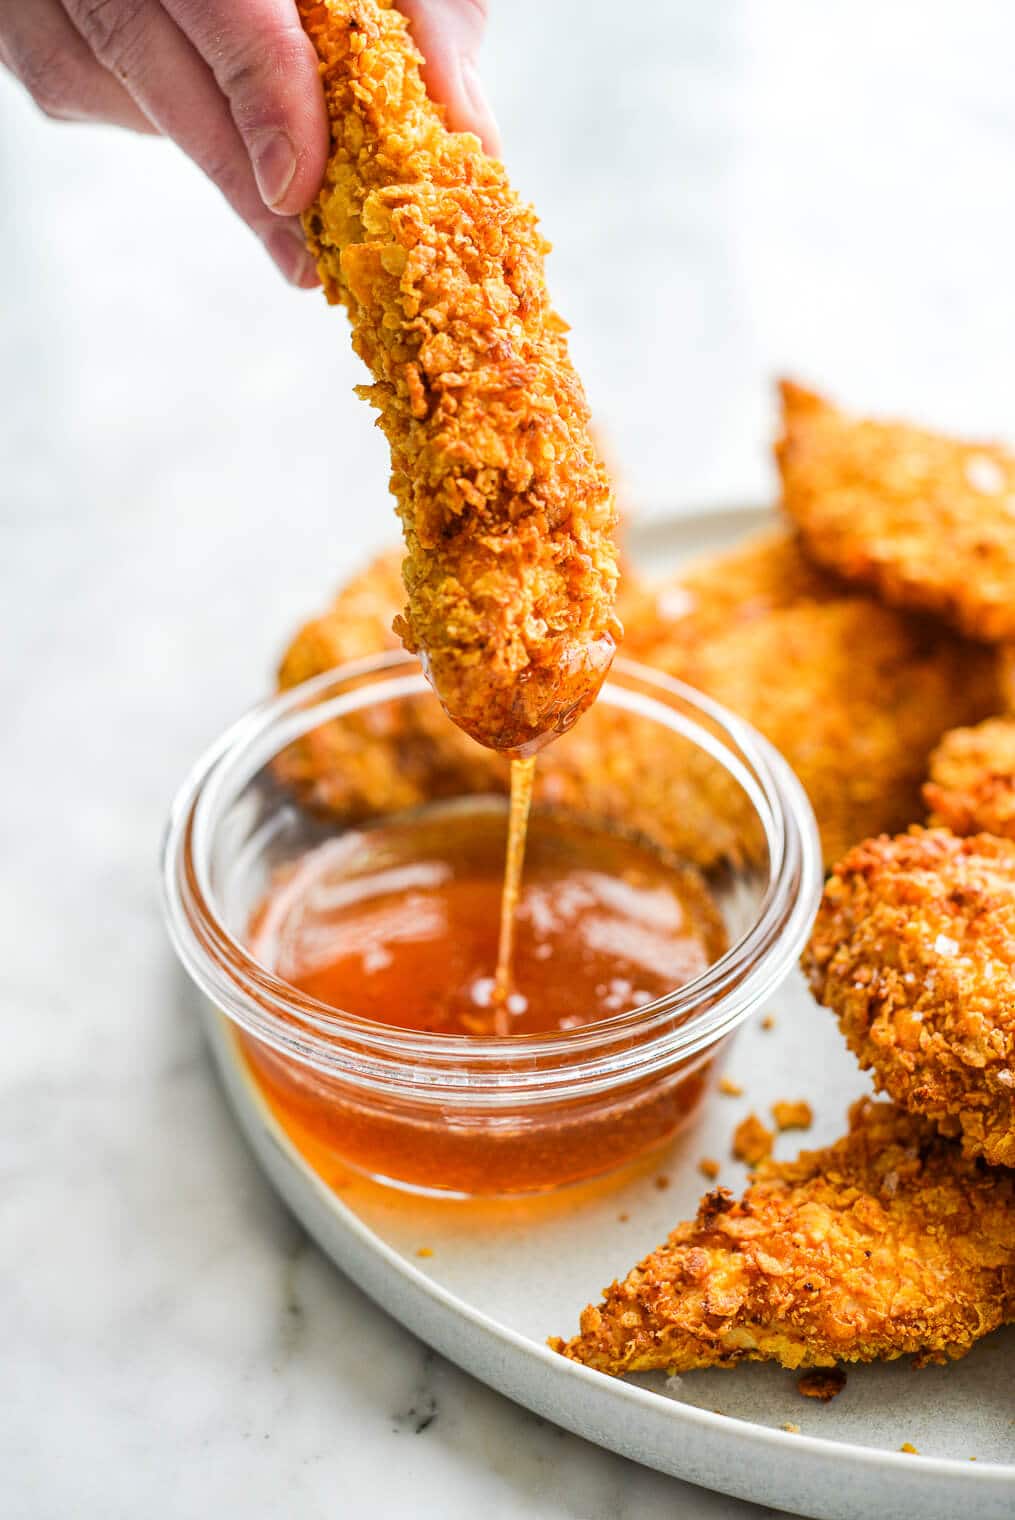 a person holding a crispy air fryer chicken tender above a small bowl of hot honey dipping sauce